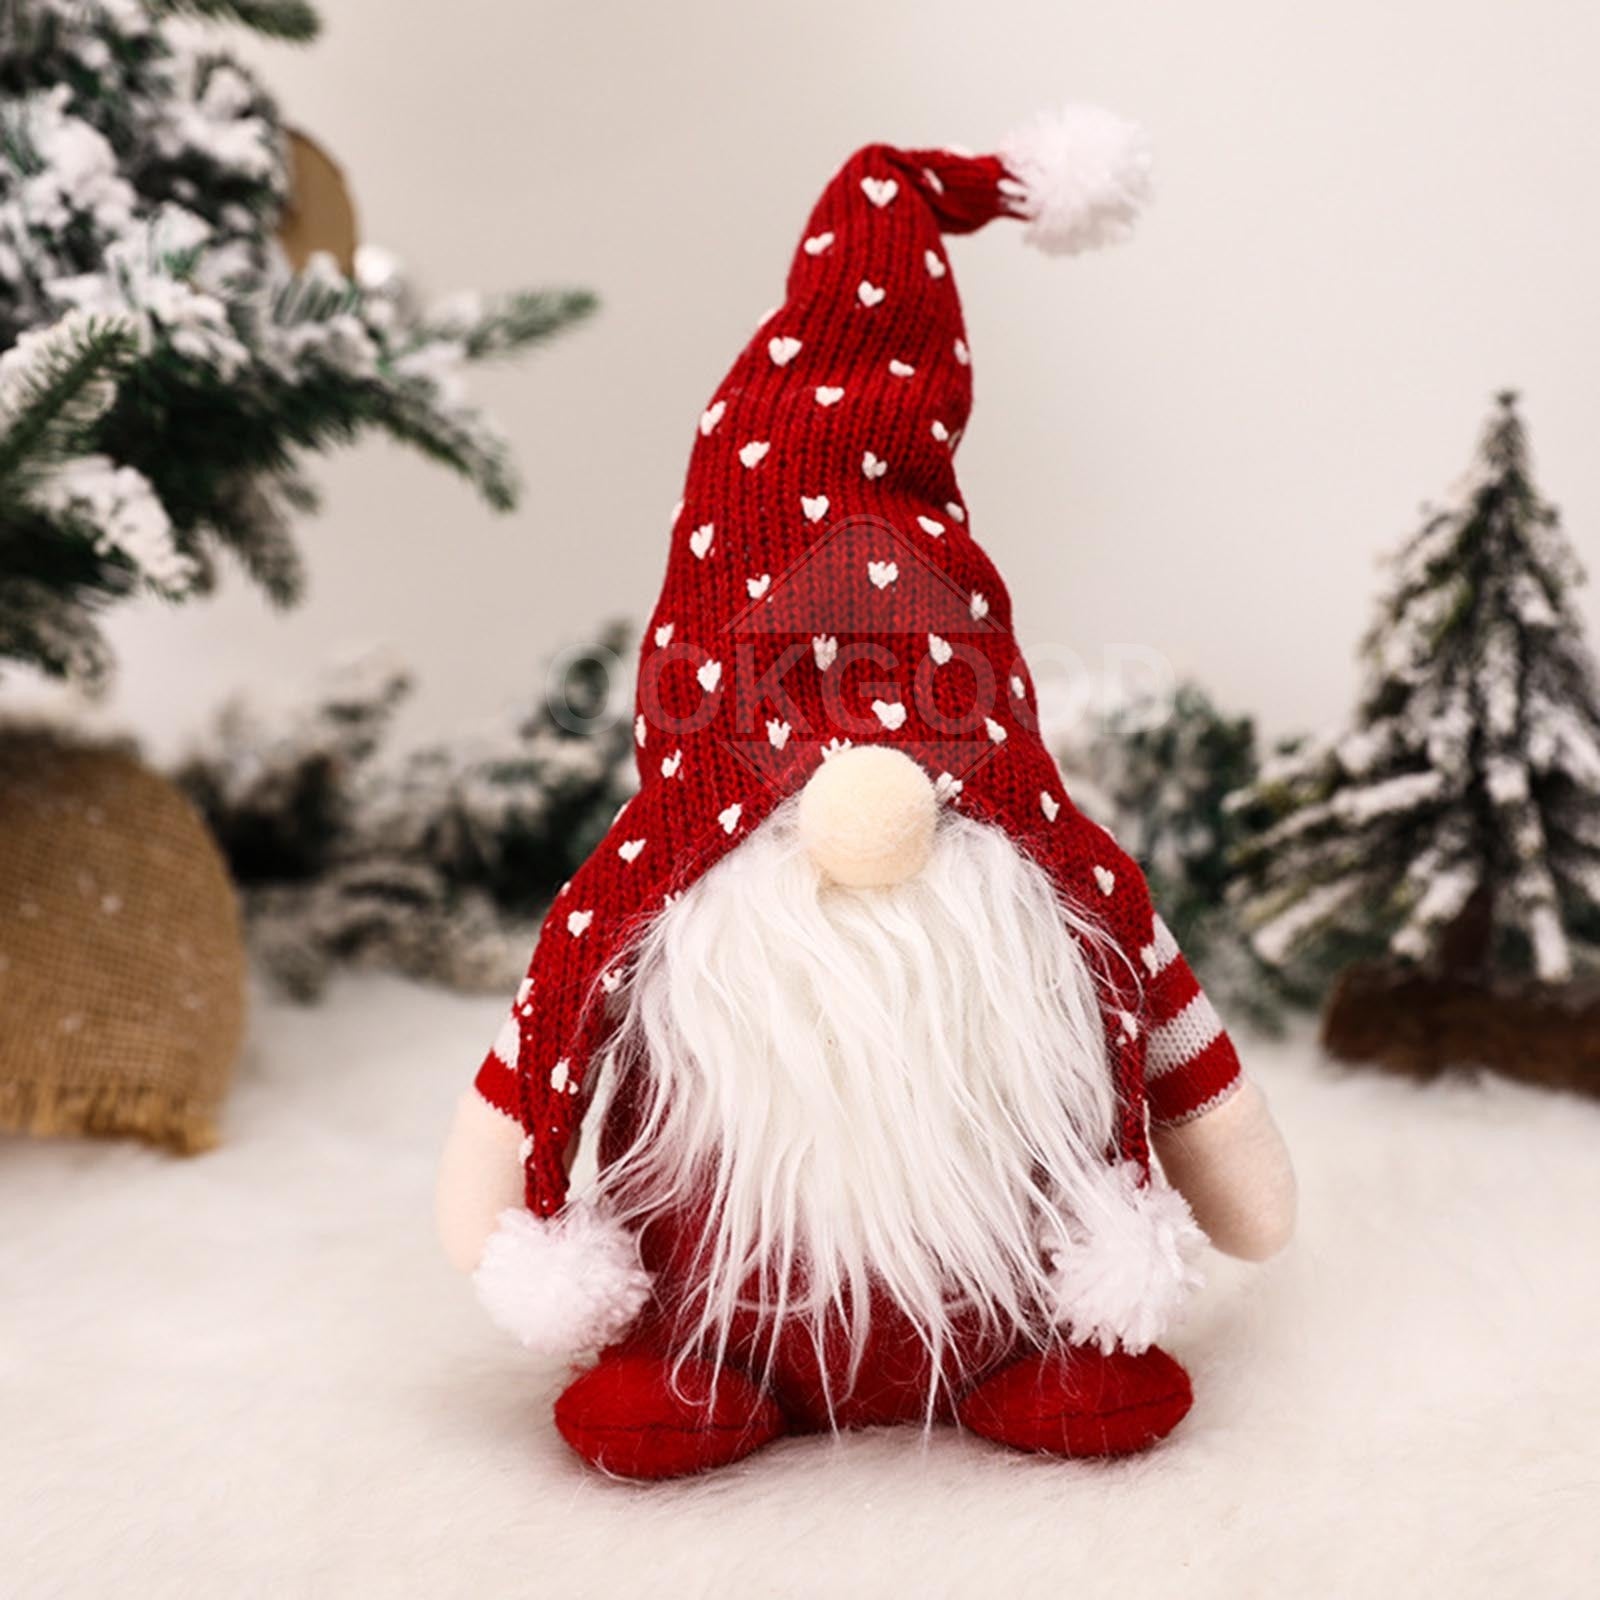 Handmade Plush Gnome With Knitted Hat For Holiday Gift